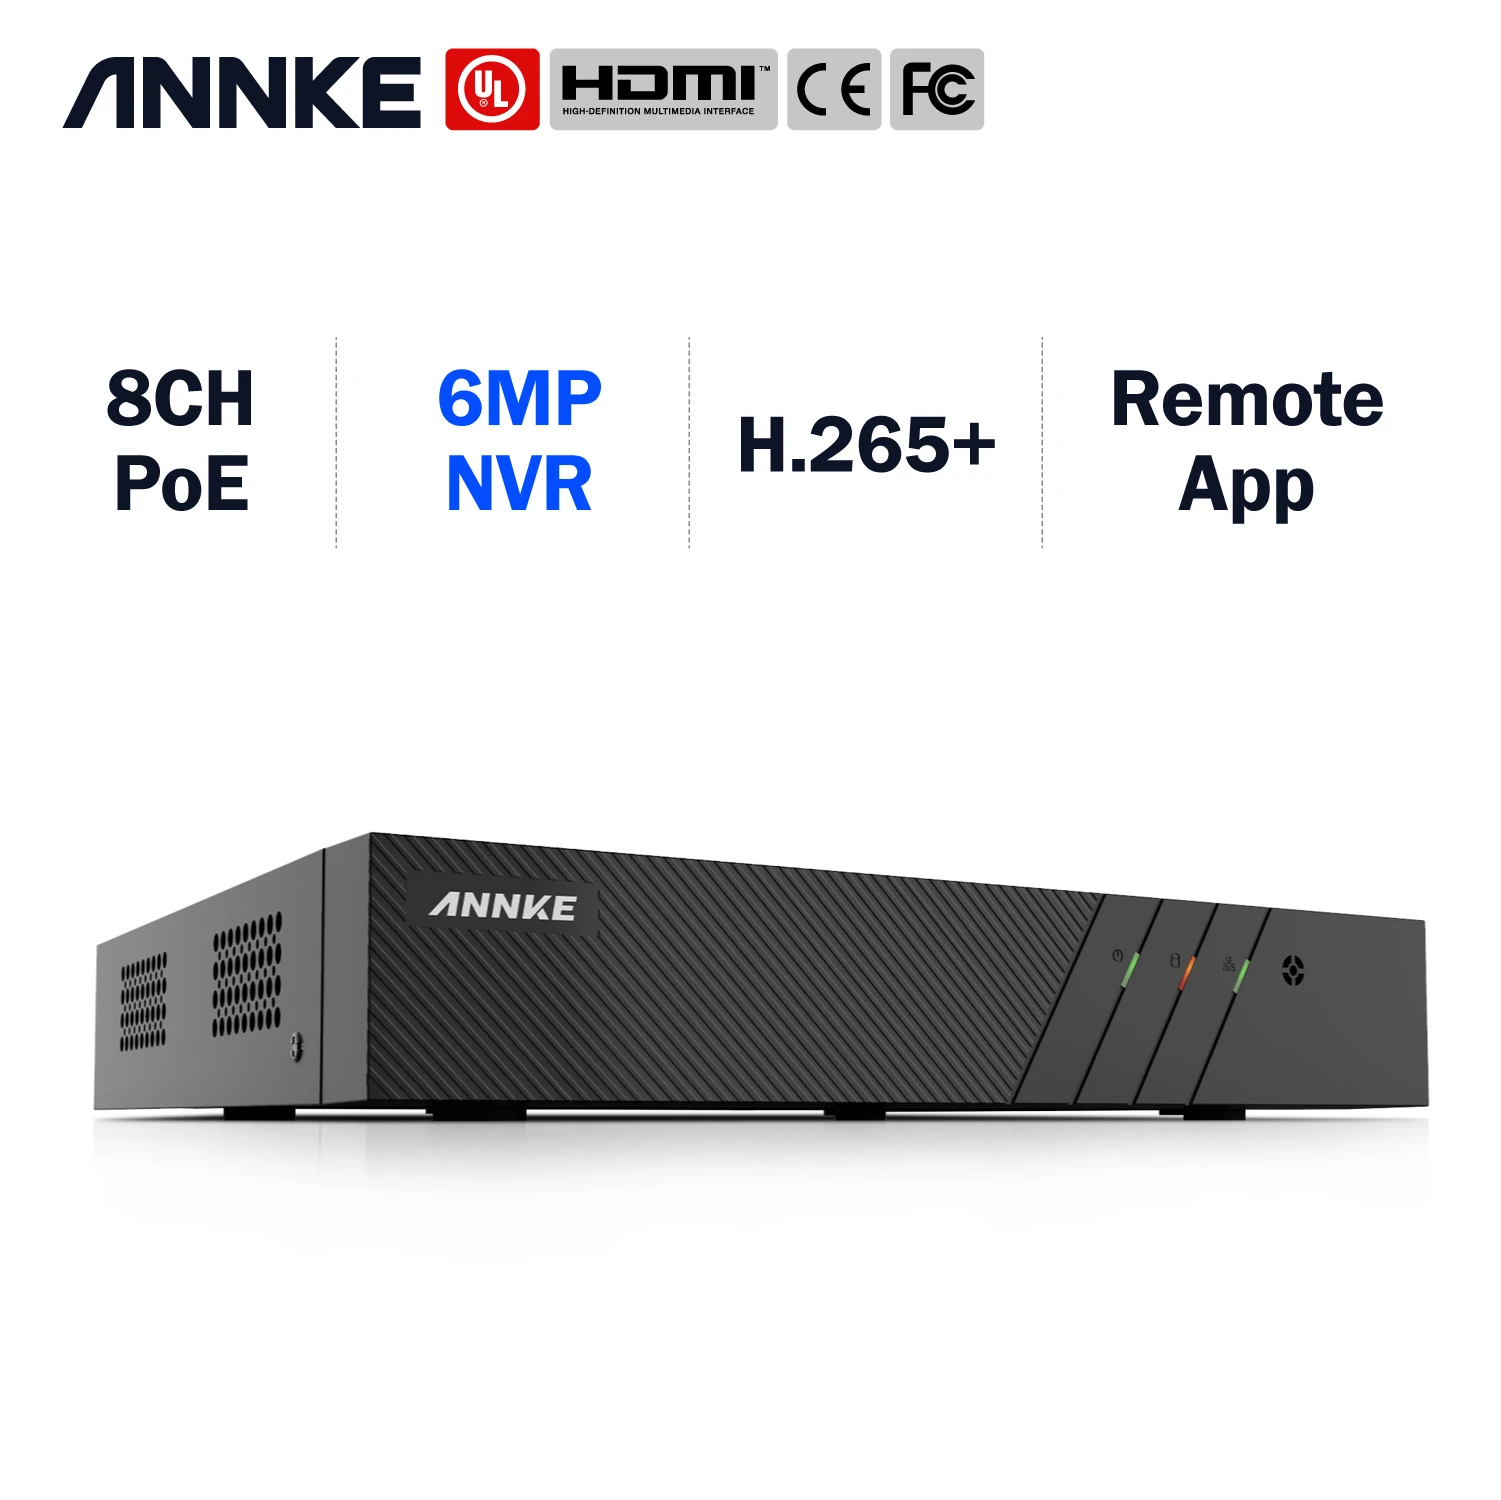 ANNKE H.265+ 6MP 8CH PoE NVR for IP Security Camera System 24/7 Record Remote Access Plug-and-Play ANNKE Vision app